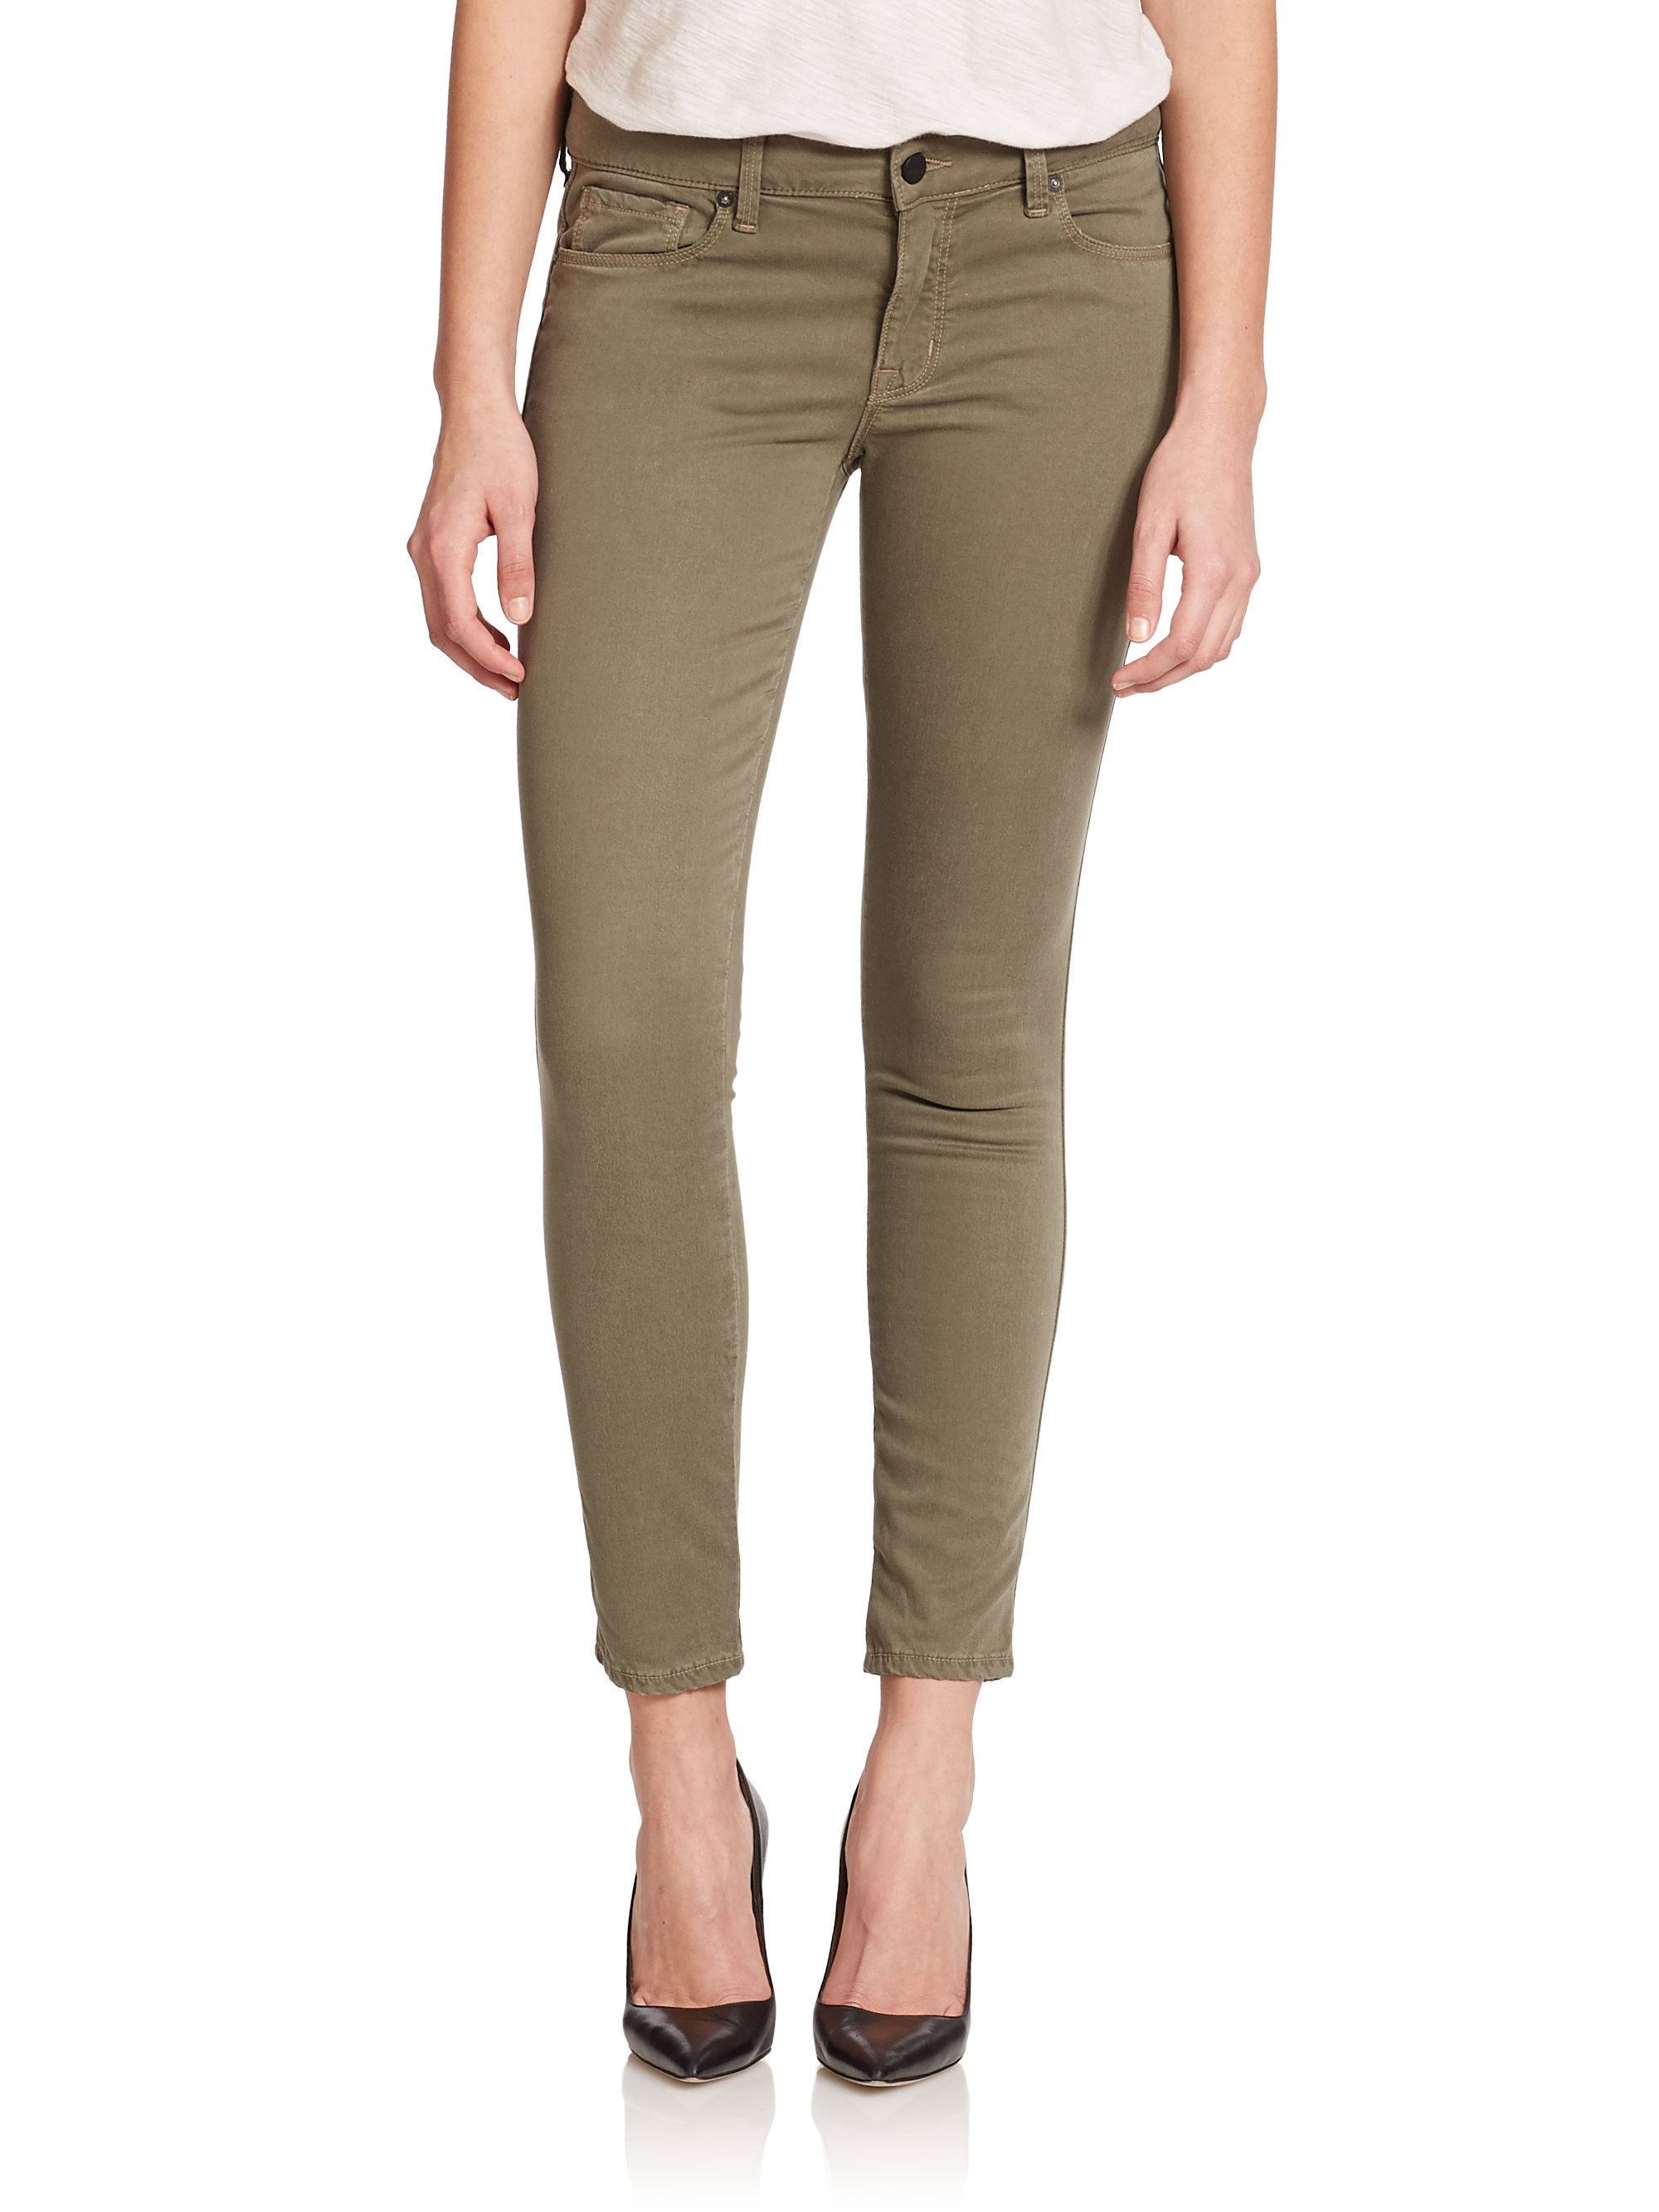 Lyst - Genetic Denim Daphne Mid-rise Cropped Skinny Jeans in Green